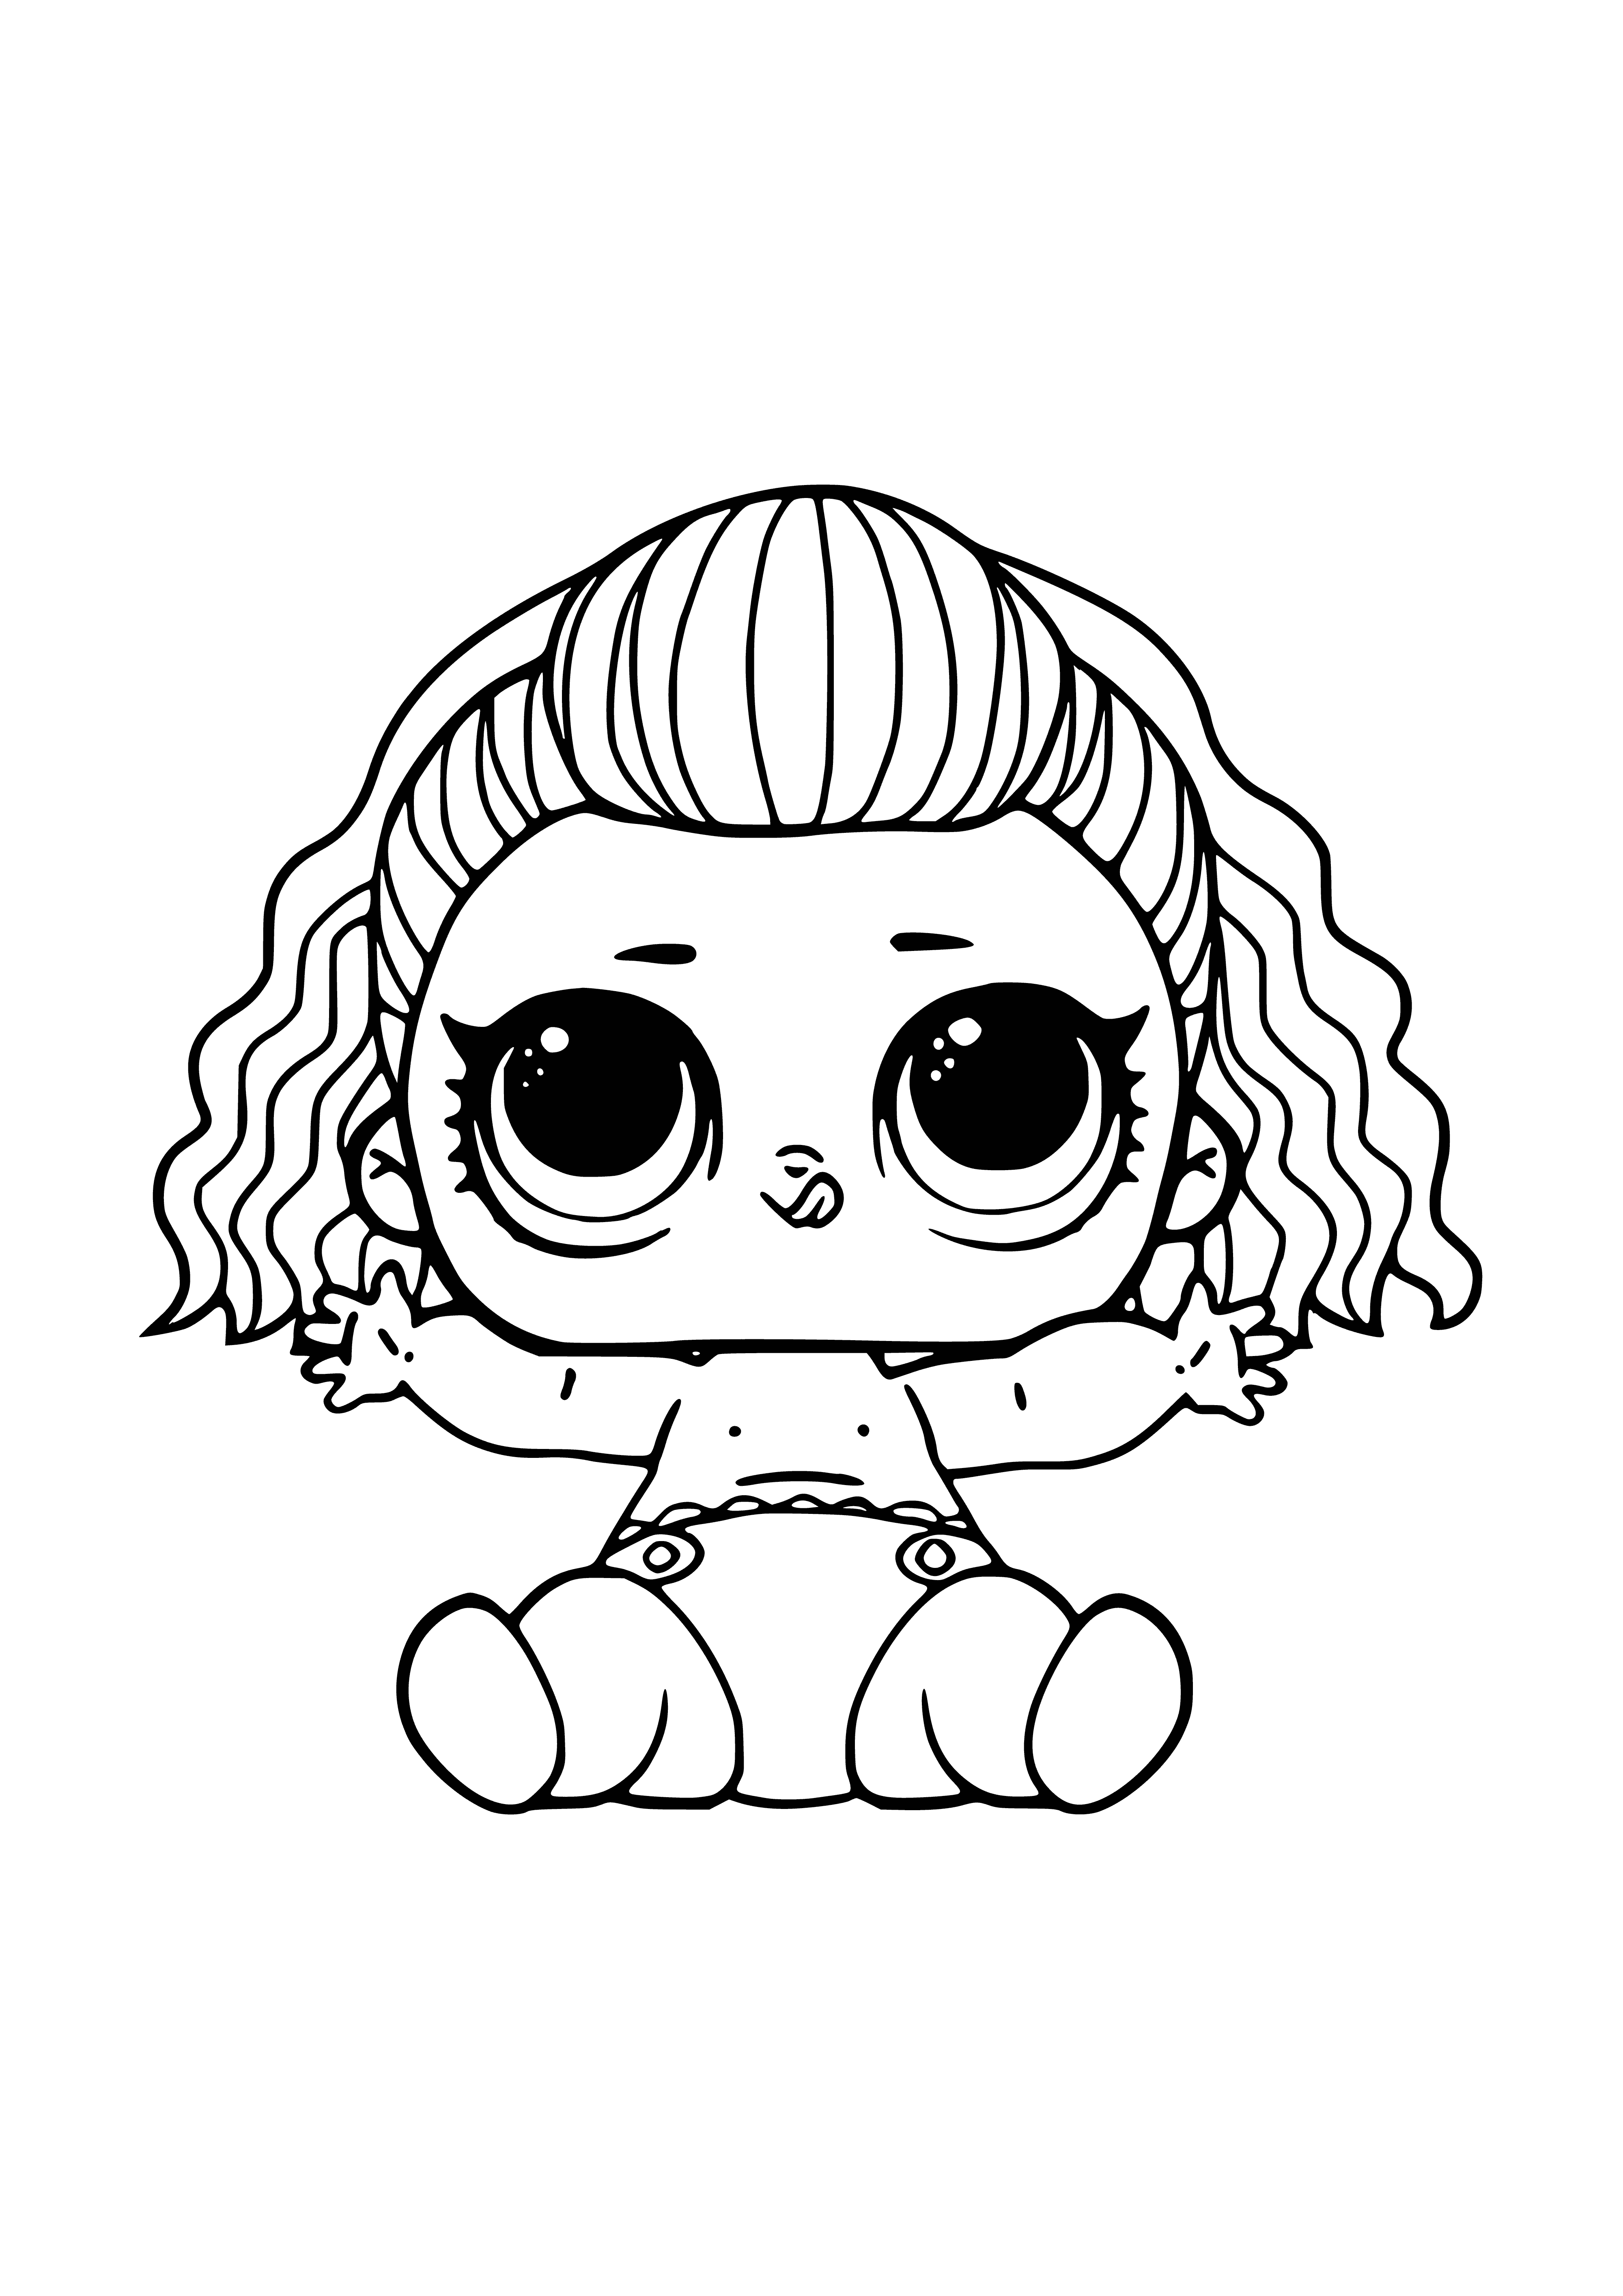 coloring page: L.O.L. Doll with blonde side ponytail, blue/white top and skirt, blue/white sneakers, white socks. #coloringpage